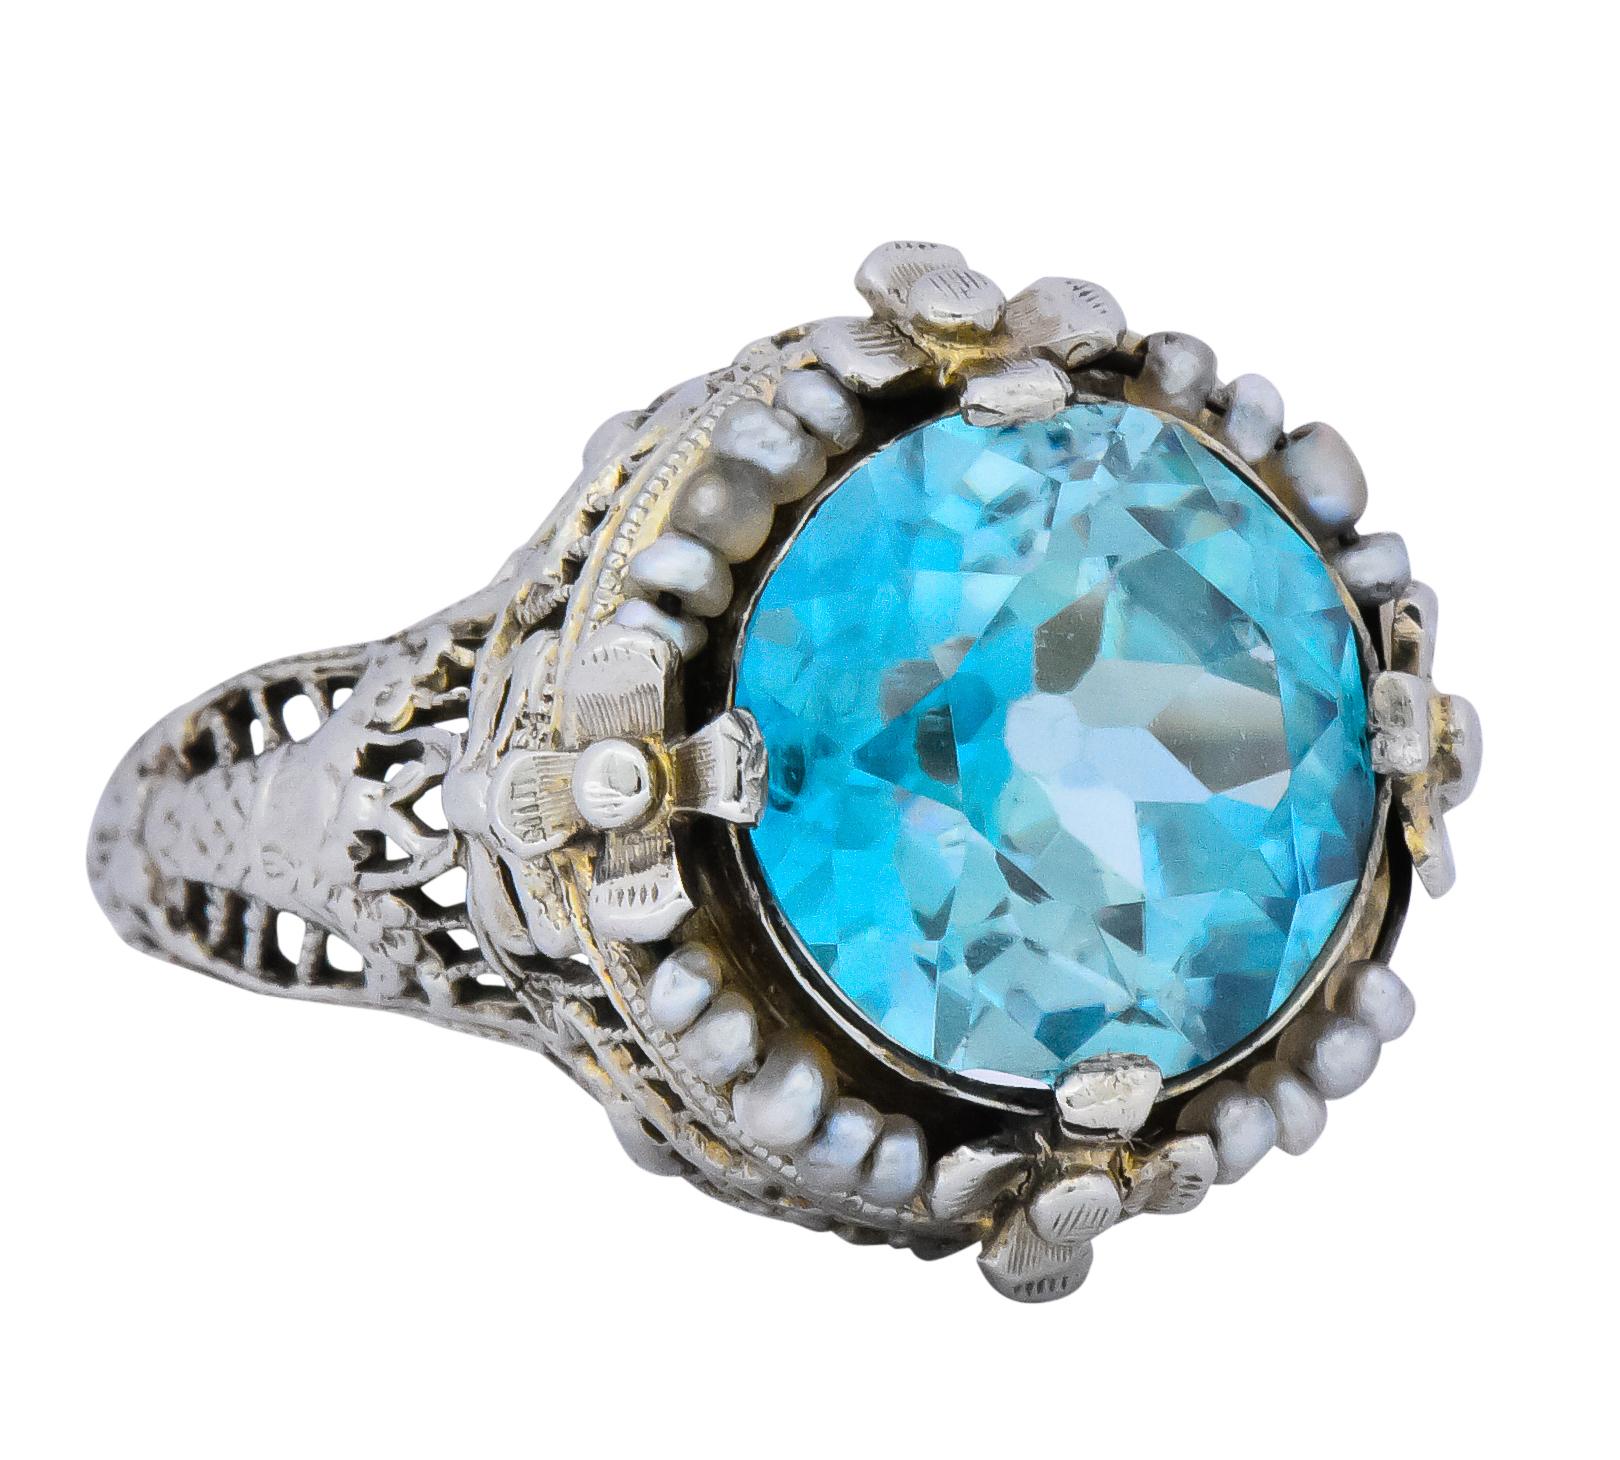 Centering a mixed European cut blue zircon weighing approximately 5.00 carats, transparent medium greenish-blue

Surrounded by beaded seed pearls and four flower stations

With linear pierced gallery featuring bow and bouquet motif on shoulders and